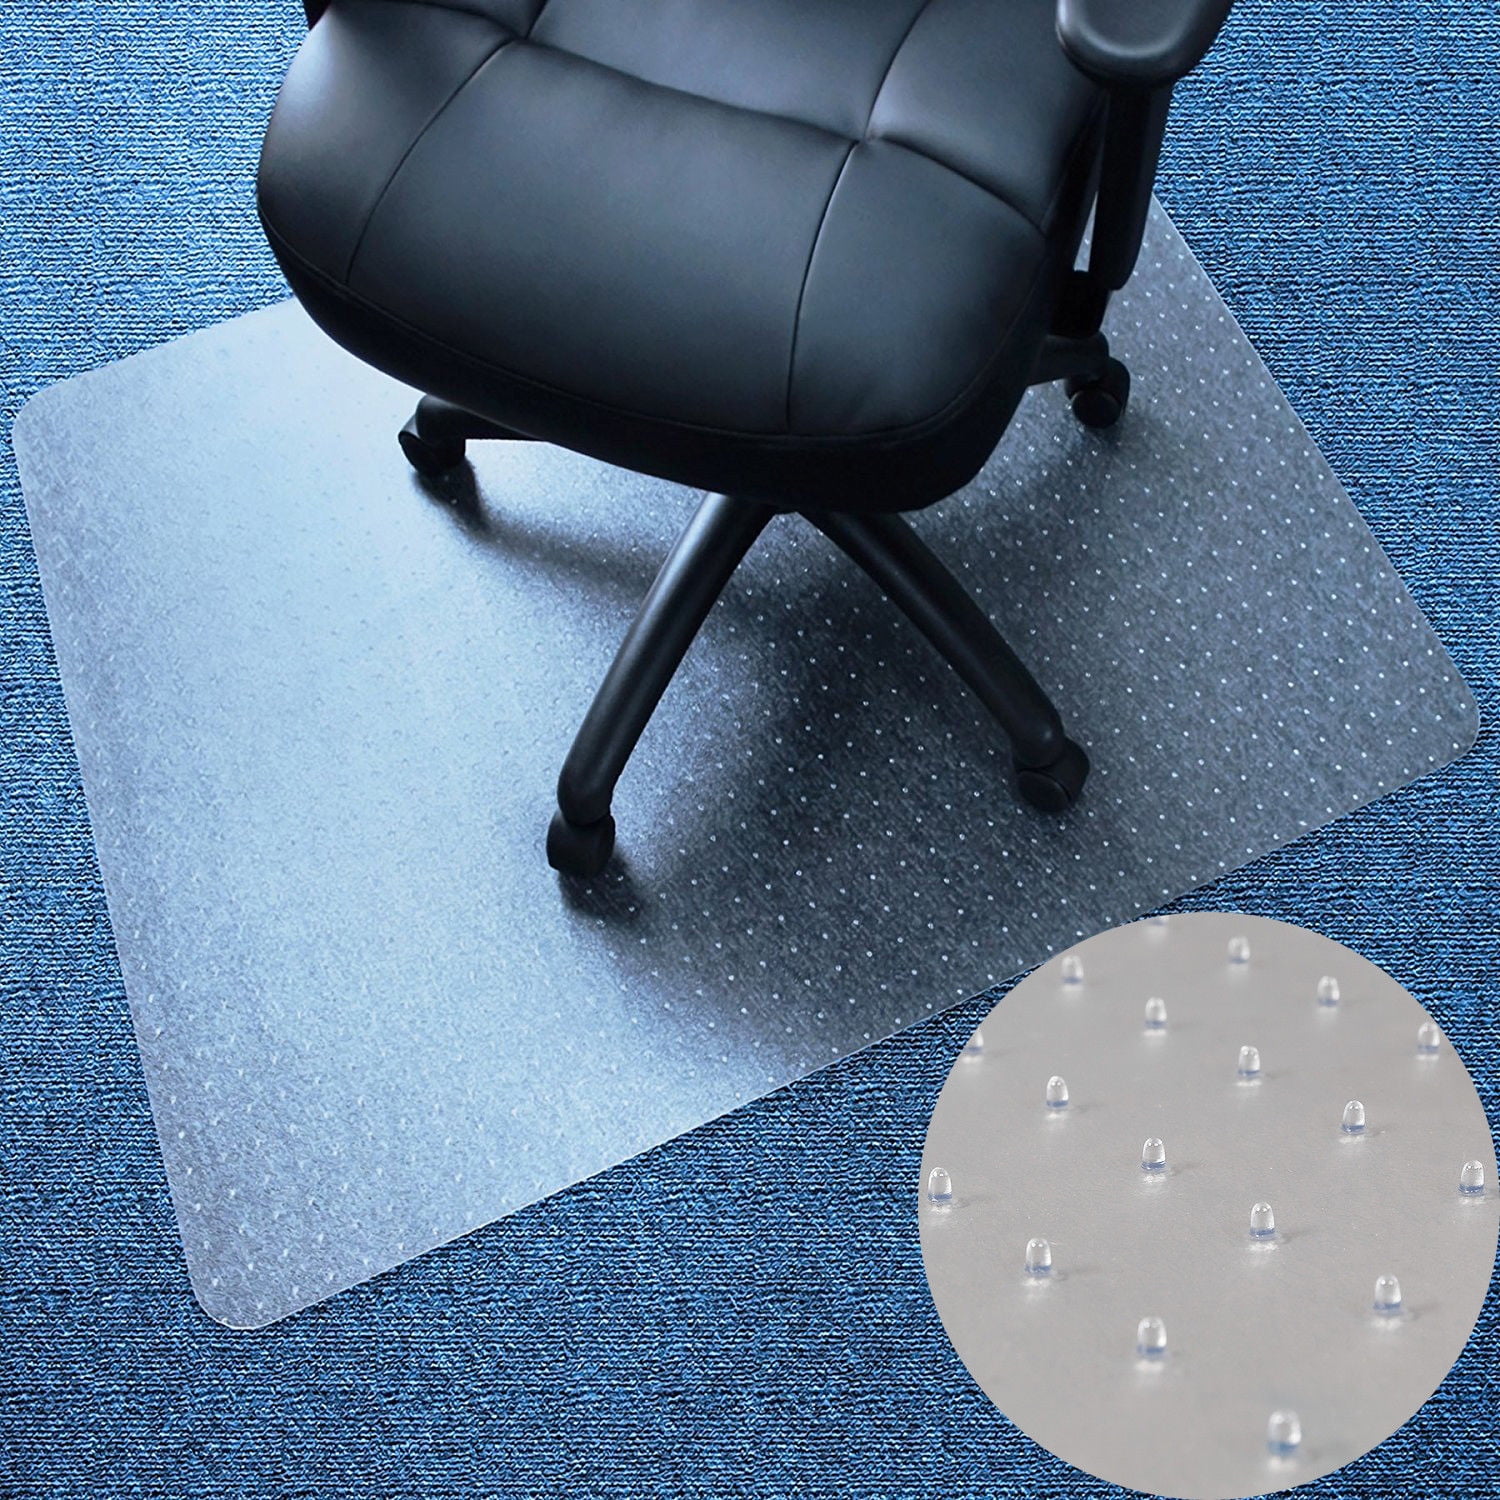 Aoolive Rectangle Pvc Home Office Chair Floor Mat Studded Back For Pile Carpet 36 X 48